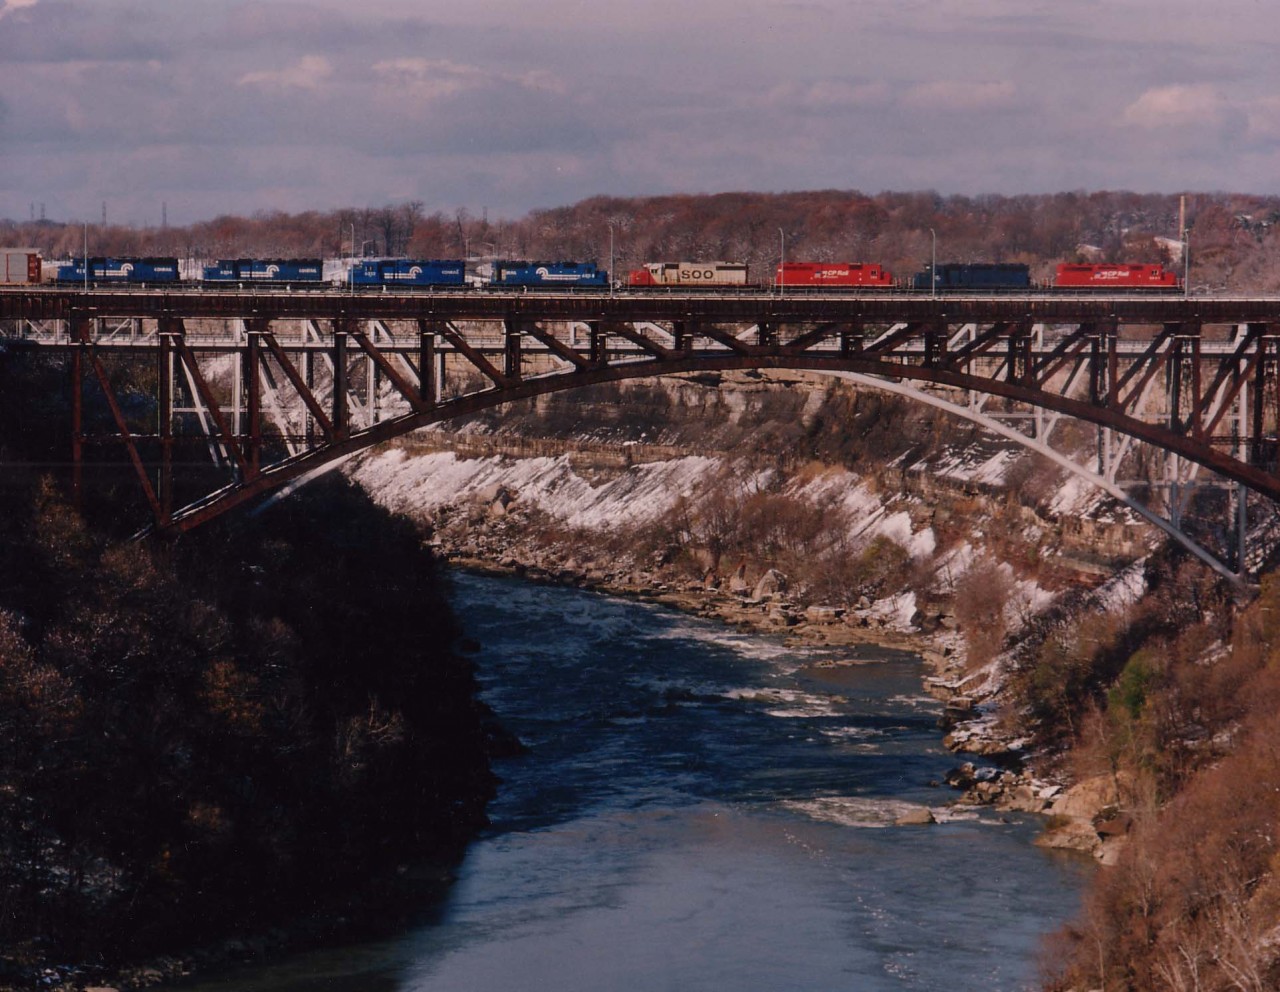 Shown here is the CP train #734 heading over the Niagara River via the old Suspension Bridge, now just a hulk too expensive to dismantle after the CP's line was pulled out of downtown Niagara Falls Ont in the late 1990s. Power this day is CP 5841, CRL 603, CP 751, SOO 6621 and CR 6308, 6322, 6304 and 812; these last four going off lease. CP had leased 24 SD40s back in the mid-90s from Conrail Leasing, and these were 4 of the first 12 to be returned by mid-November. Second unit in consist, CRL 603 (x-CR 6280)as well as another 11 Conrail Leasing units on the system remained until taken over by HELM (and renumbered)in the spring of 1996.
Photo taken at 1315 hrs on a windy but bright day.